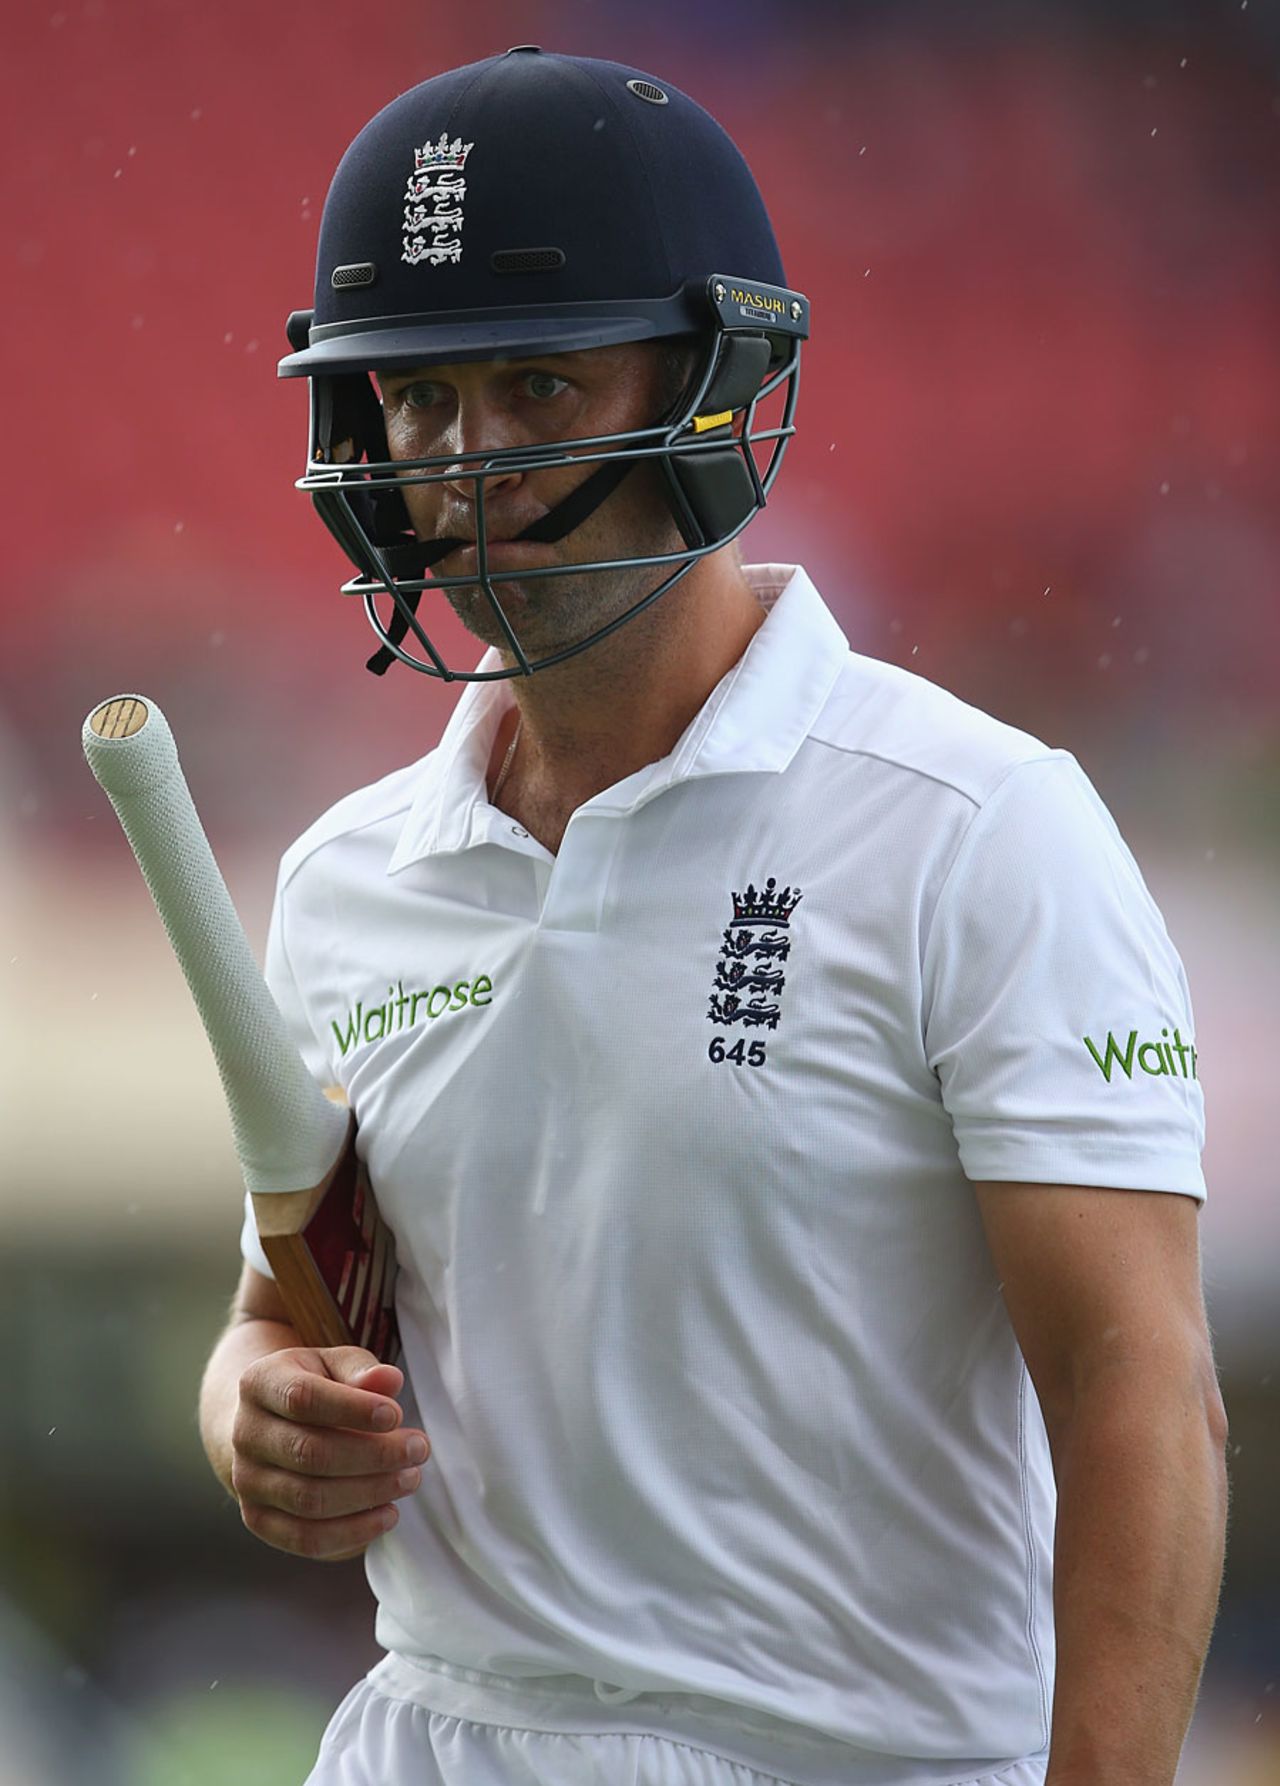 Jonathan Trott failed for the second time in the match, West Indies v England, 1st Test, North Sound, 3rd day, April 15, 2015